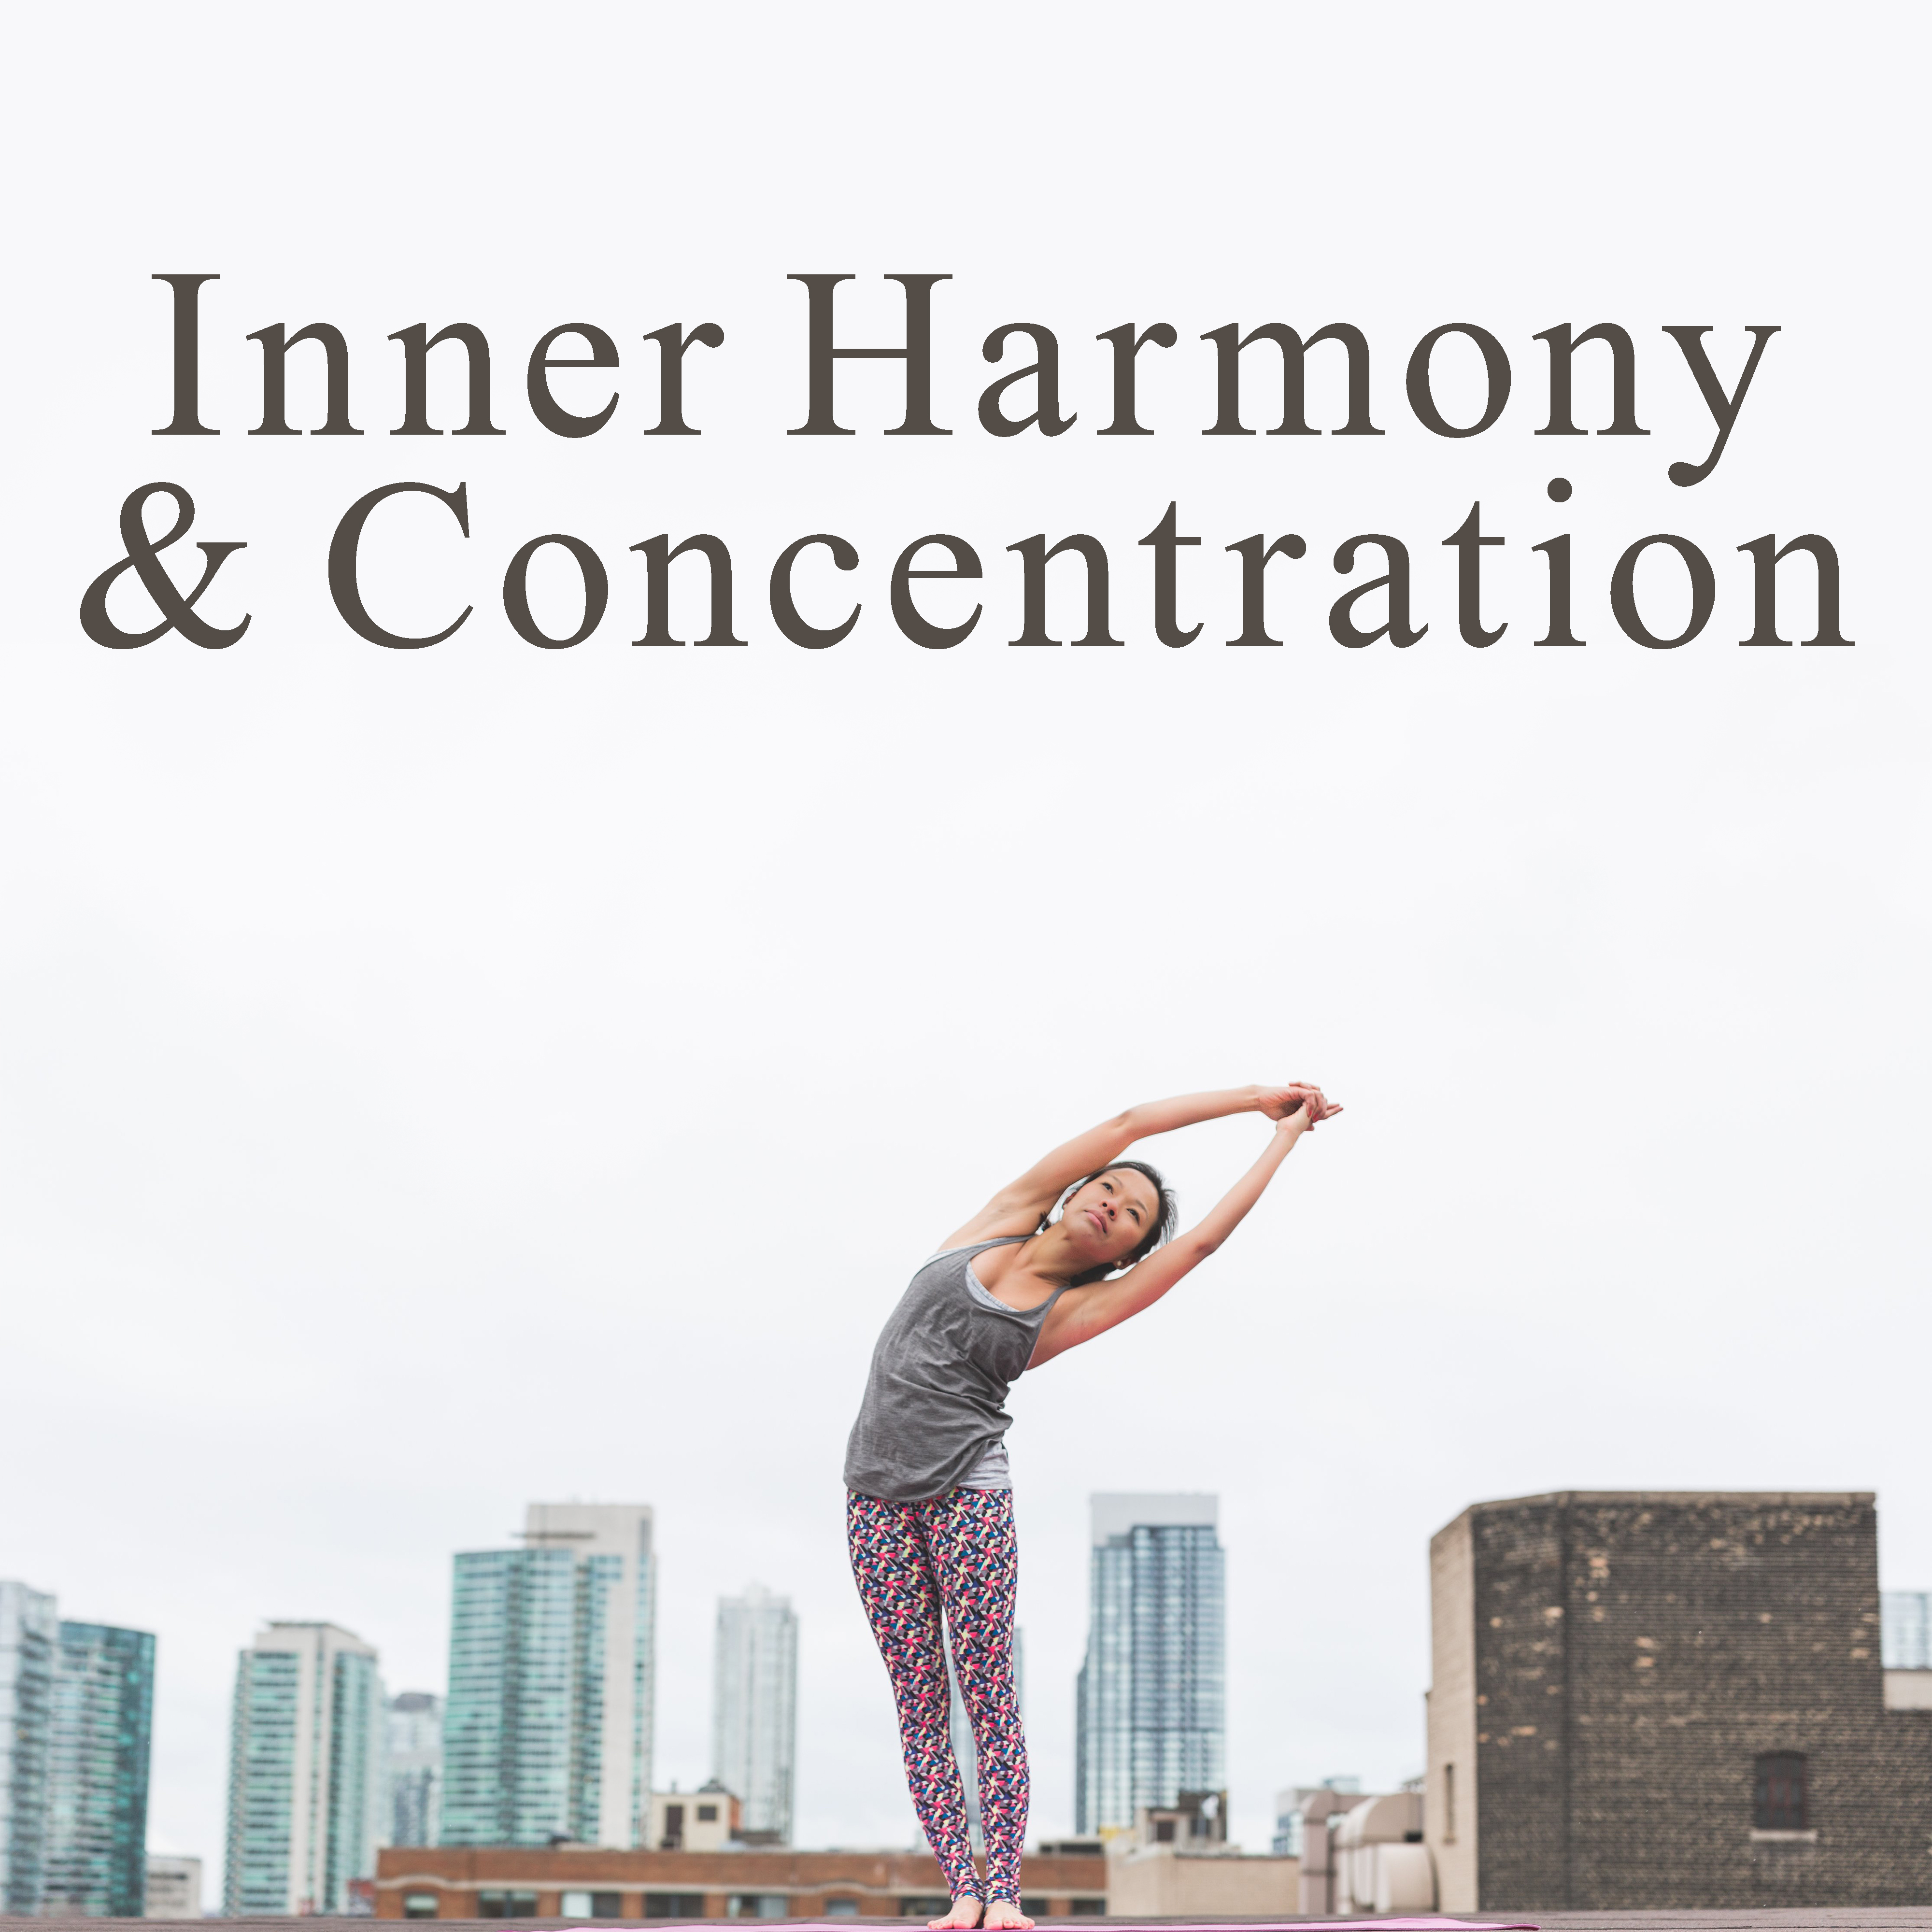 Inner Harmony & Concentration – Music for Meditation, Yoga, Healing, Asian Zen, Relaxation, Hatha Yoga, Soothing Sounds, Calm Down